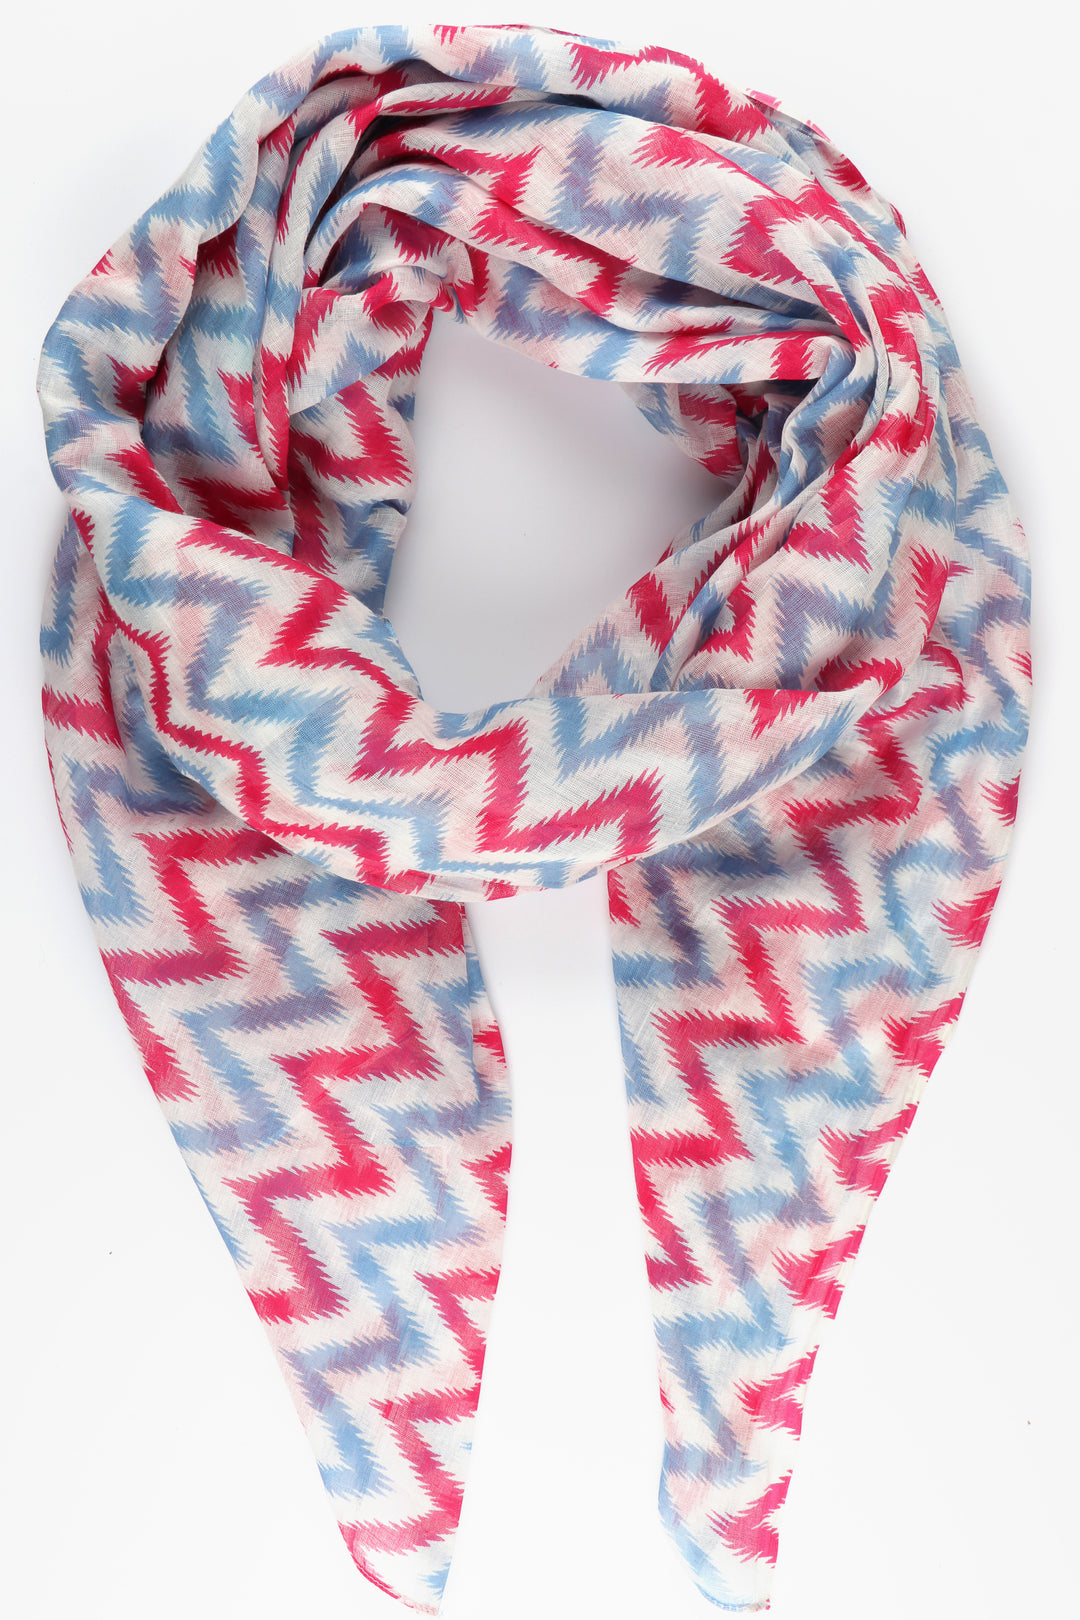 lightweight cotton scarf with an alternating blue and pink zig zag pattern